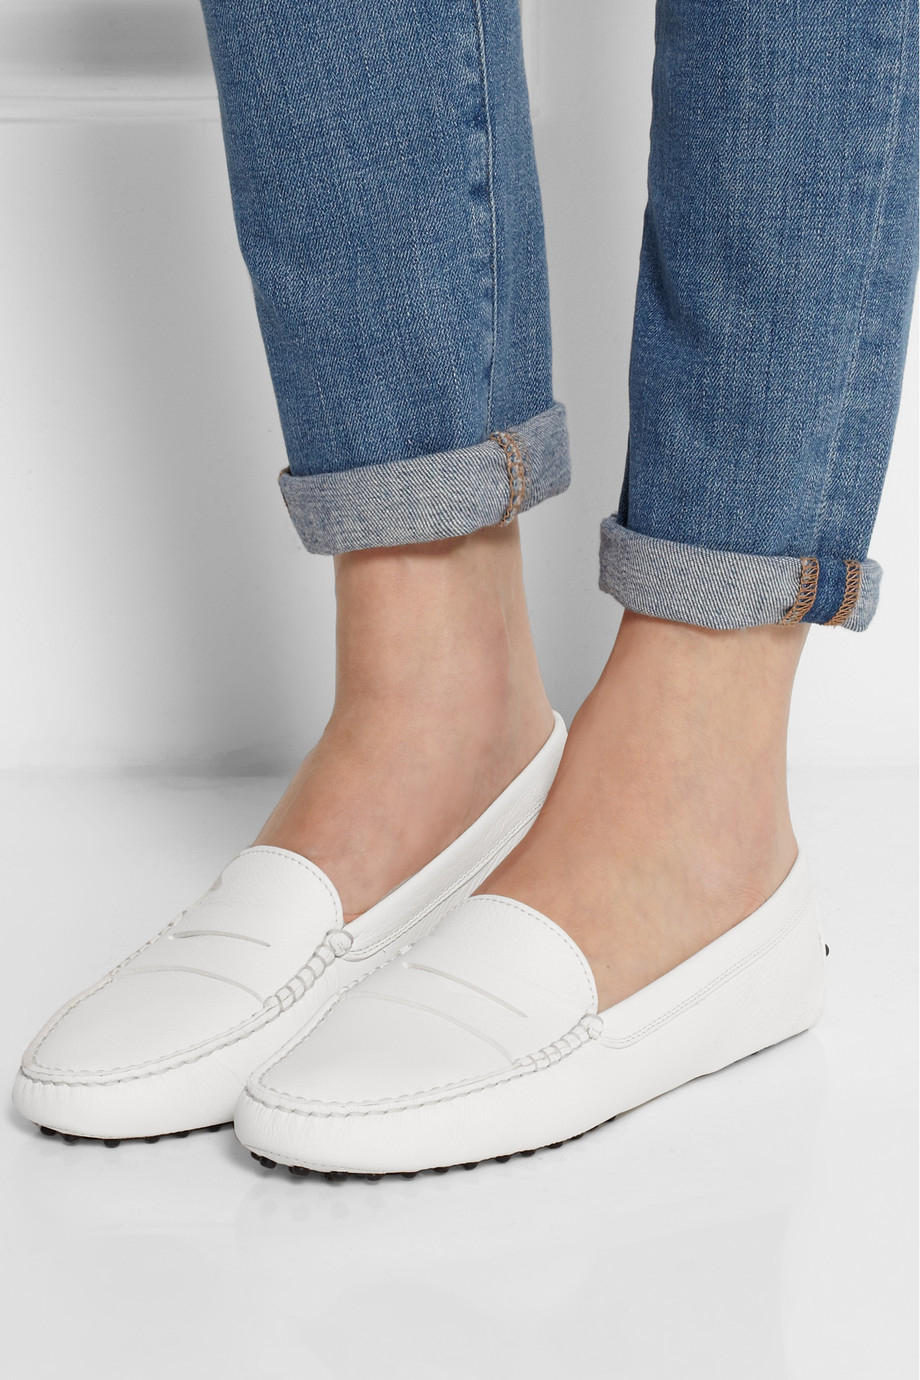 tods loafers white